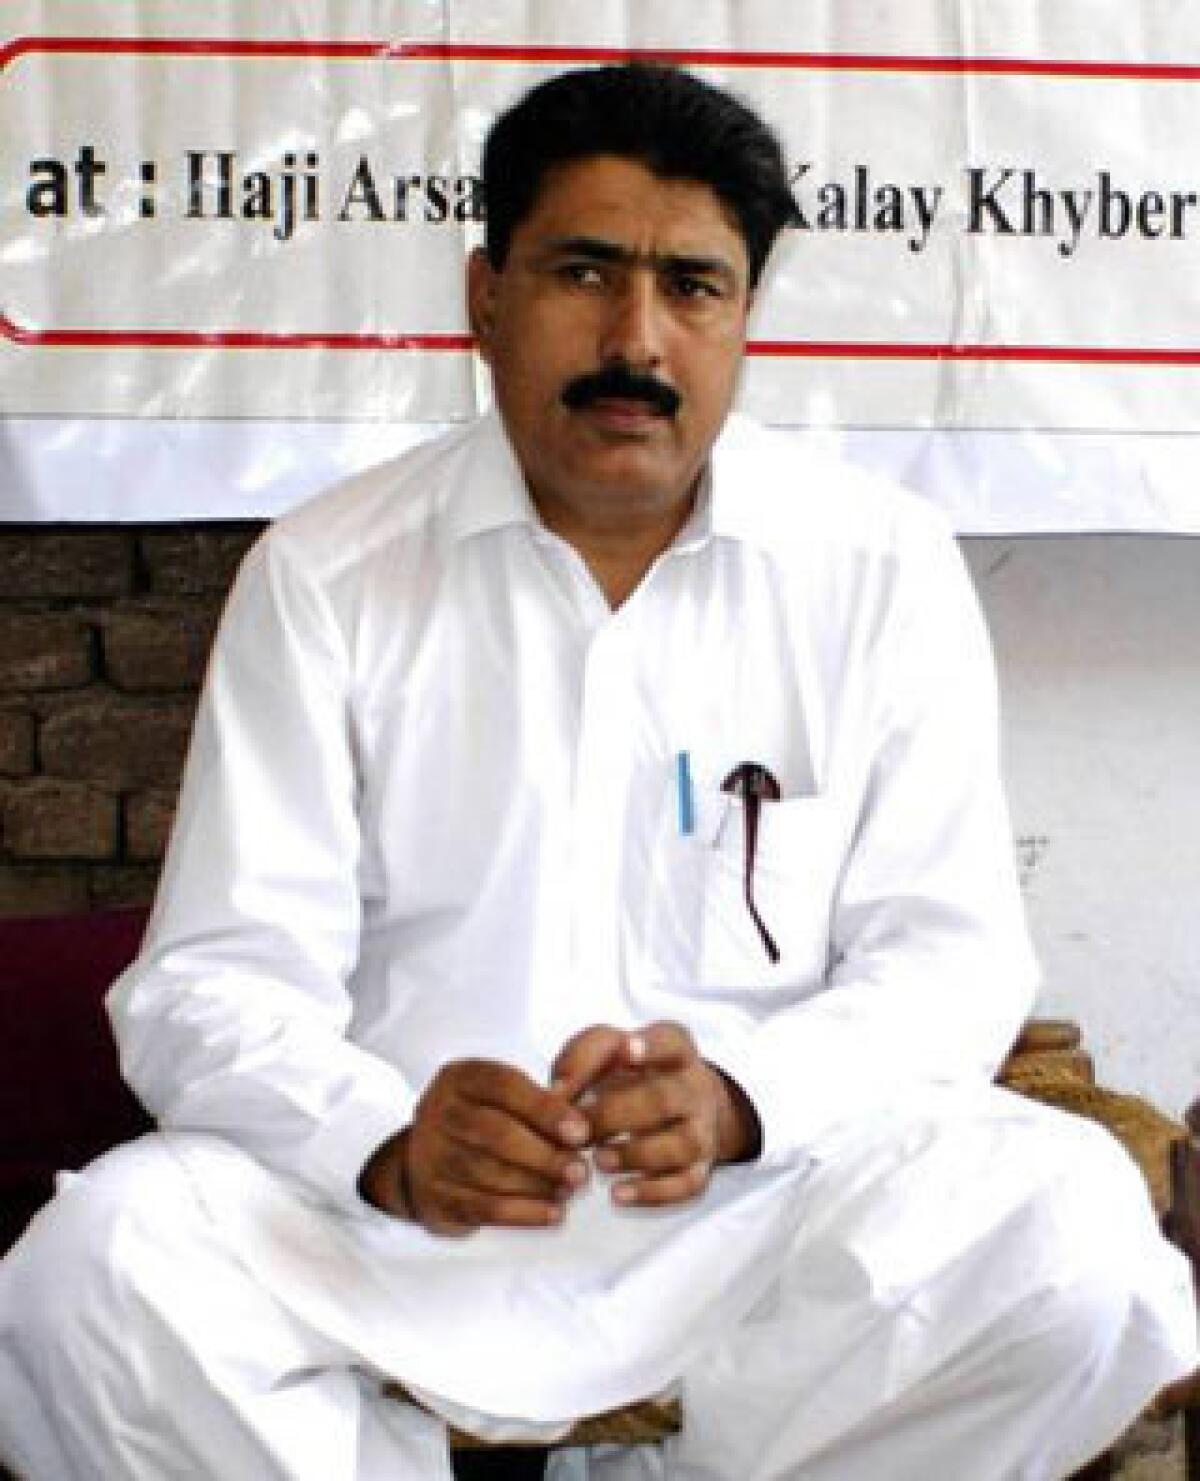 Dr. Shakeel Afridi, whose 33-year prison sentence was overturned, remains in the central jail in Peshawar, Pakistan, while awaiting a new trial.